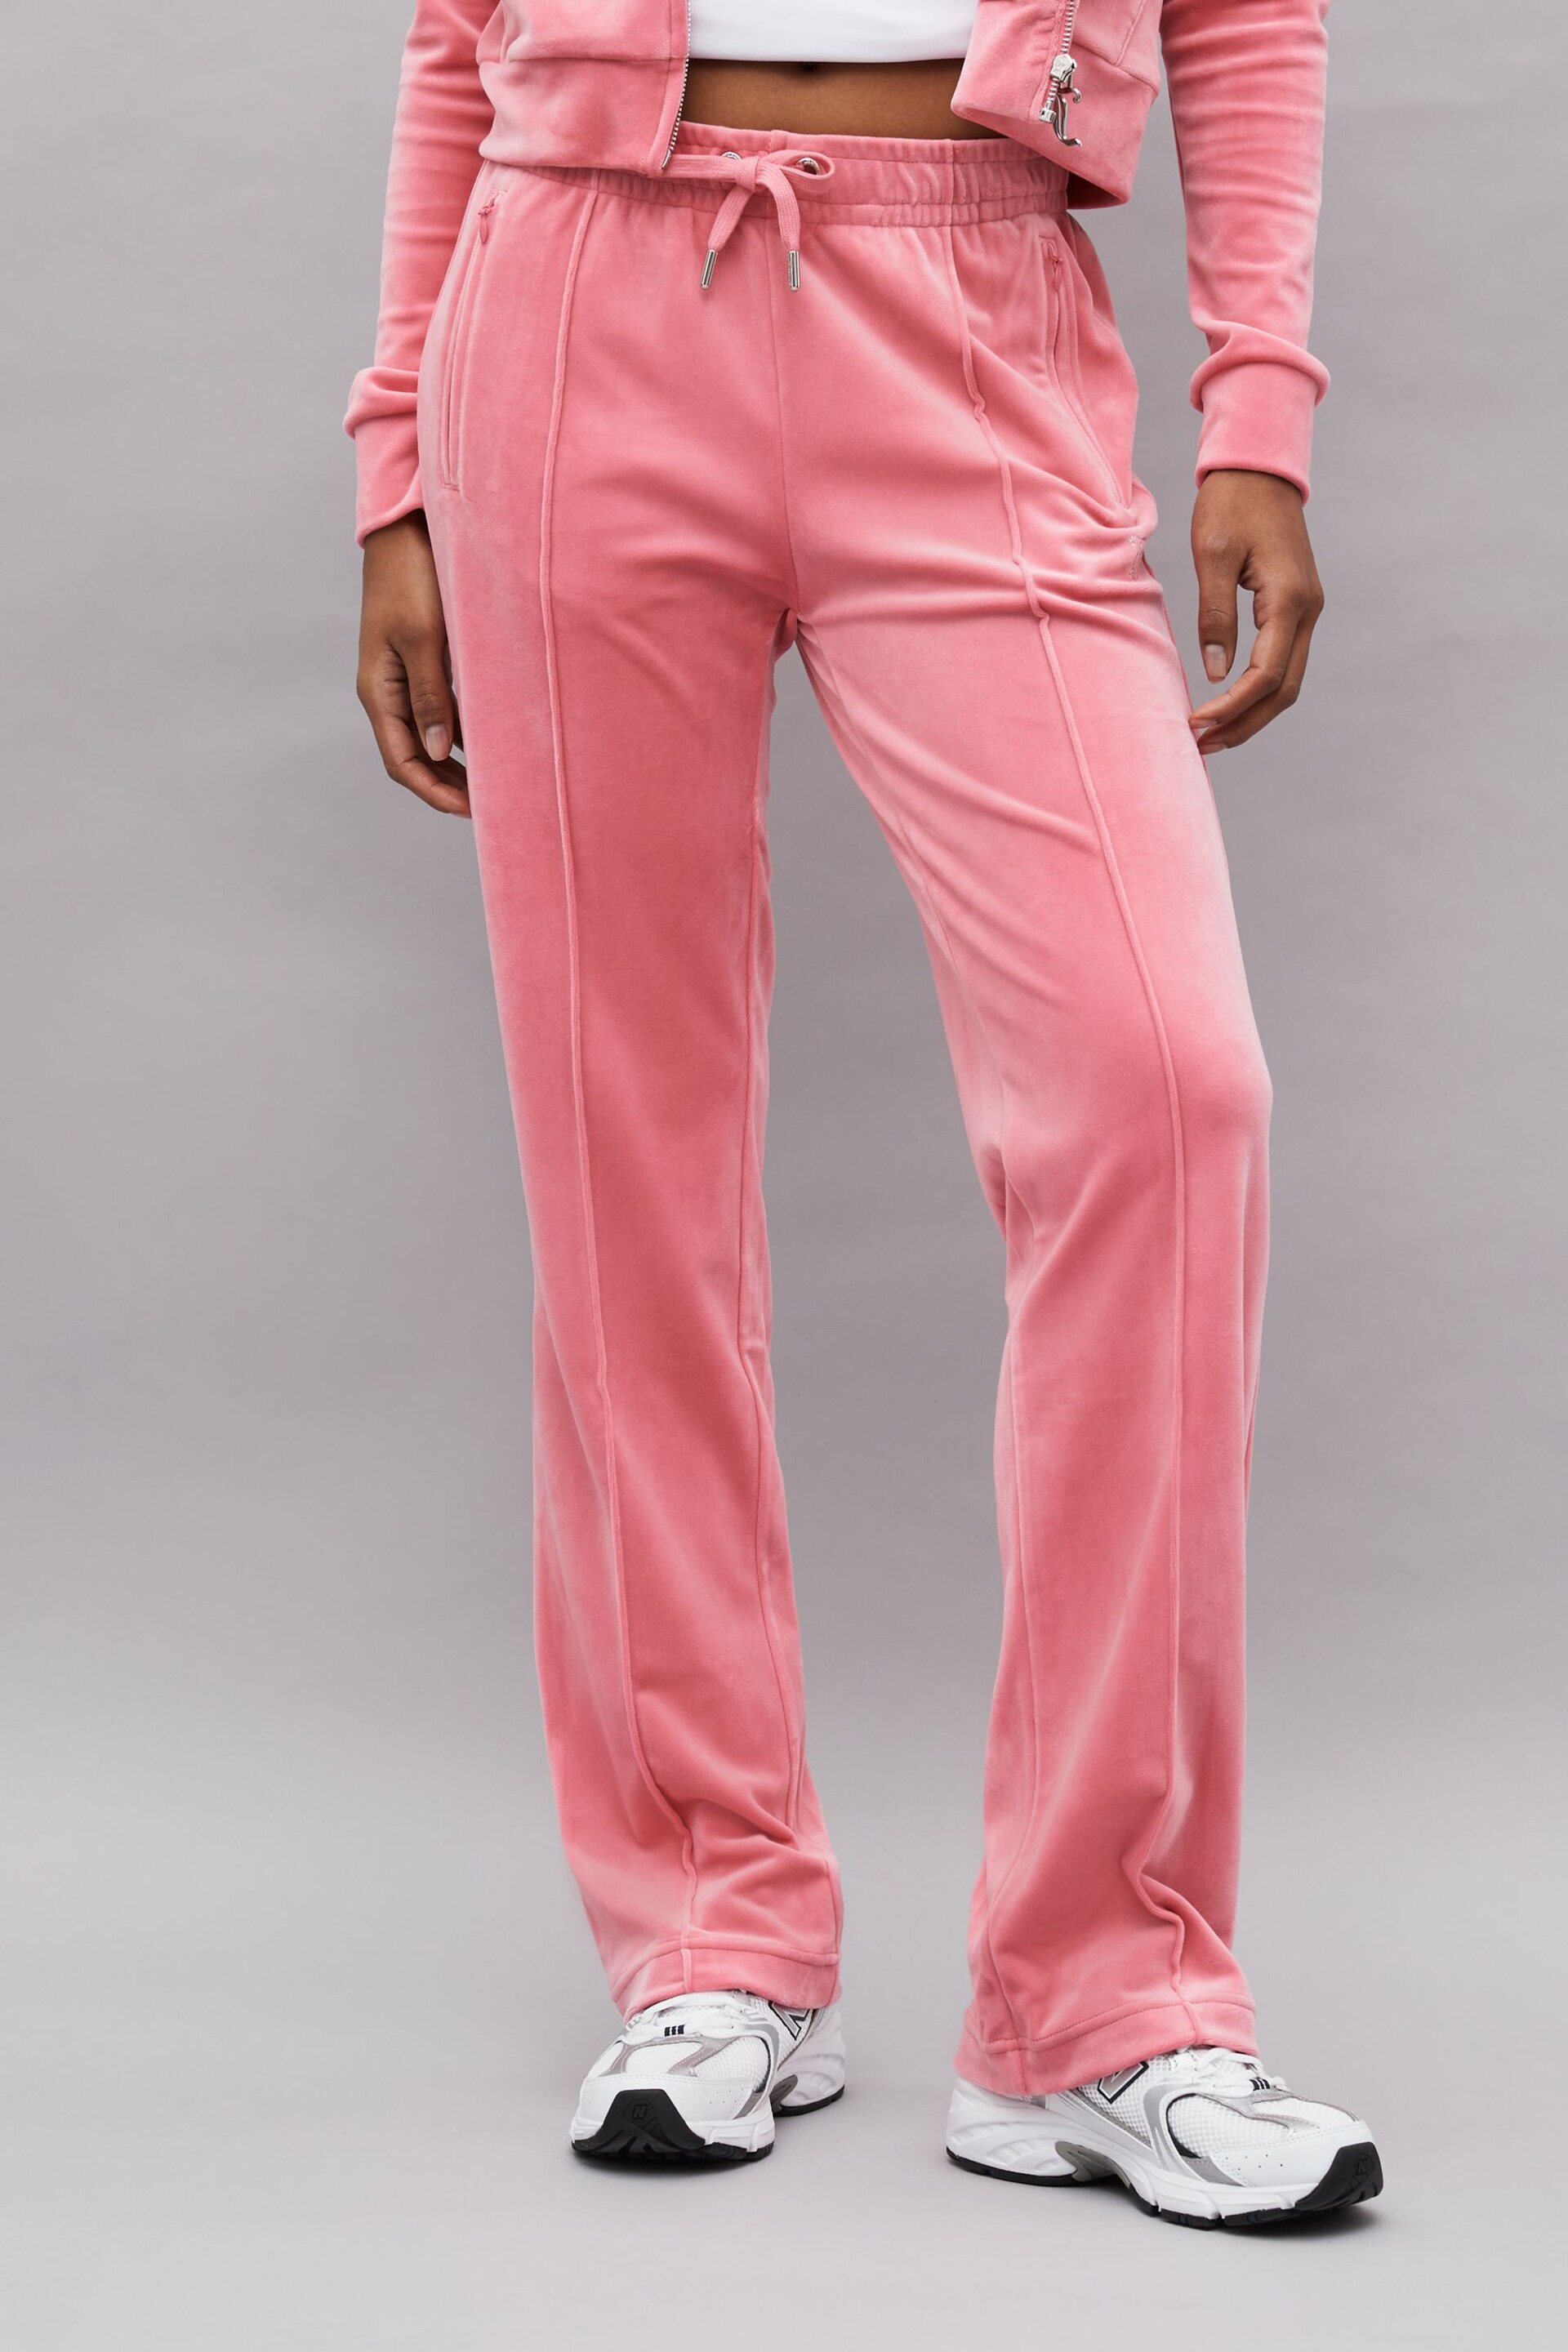 Juicy Couture Velour Straight Leg Trackpants With Diamante Branding - Image 1 of 4